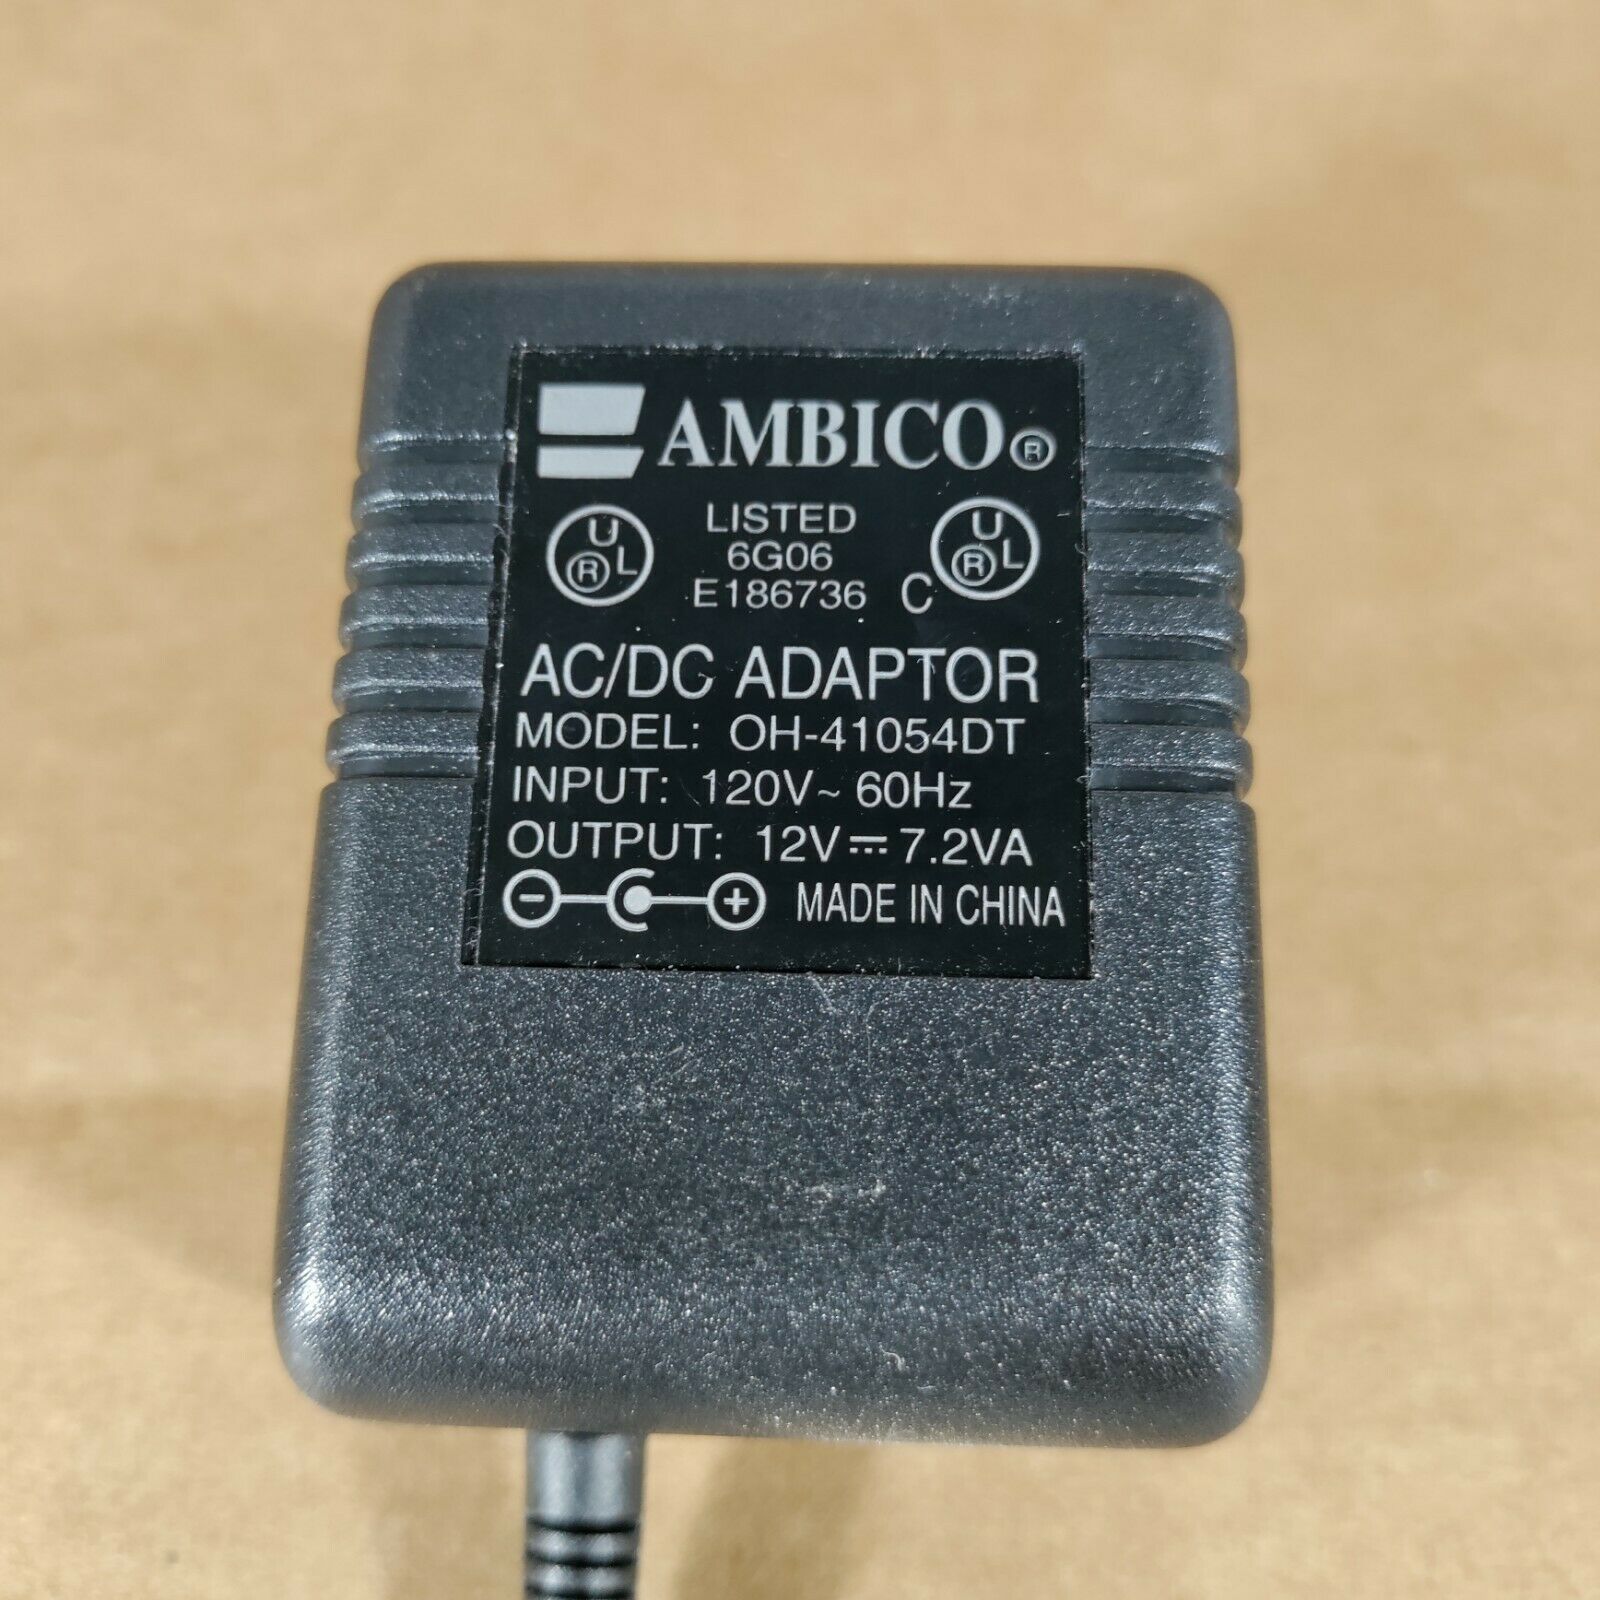 Ambico OH-41054DT AC Adapter Power Supply Wall Charger Output 12 Volts 7.2 VA Brand: Ambico Type: AC/DC Adapter Co